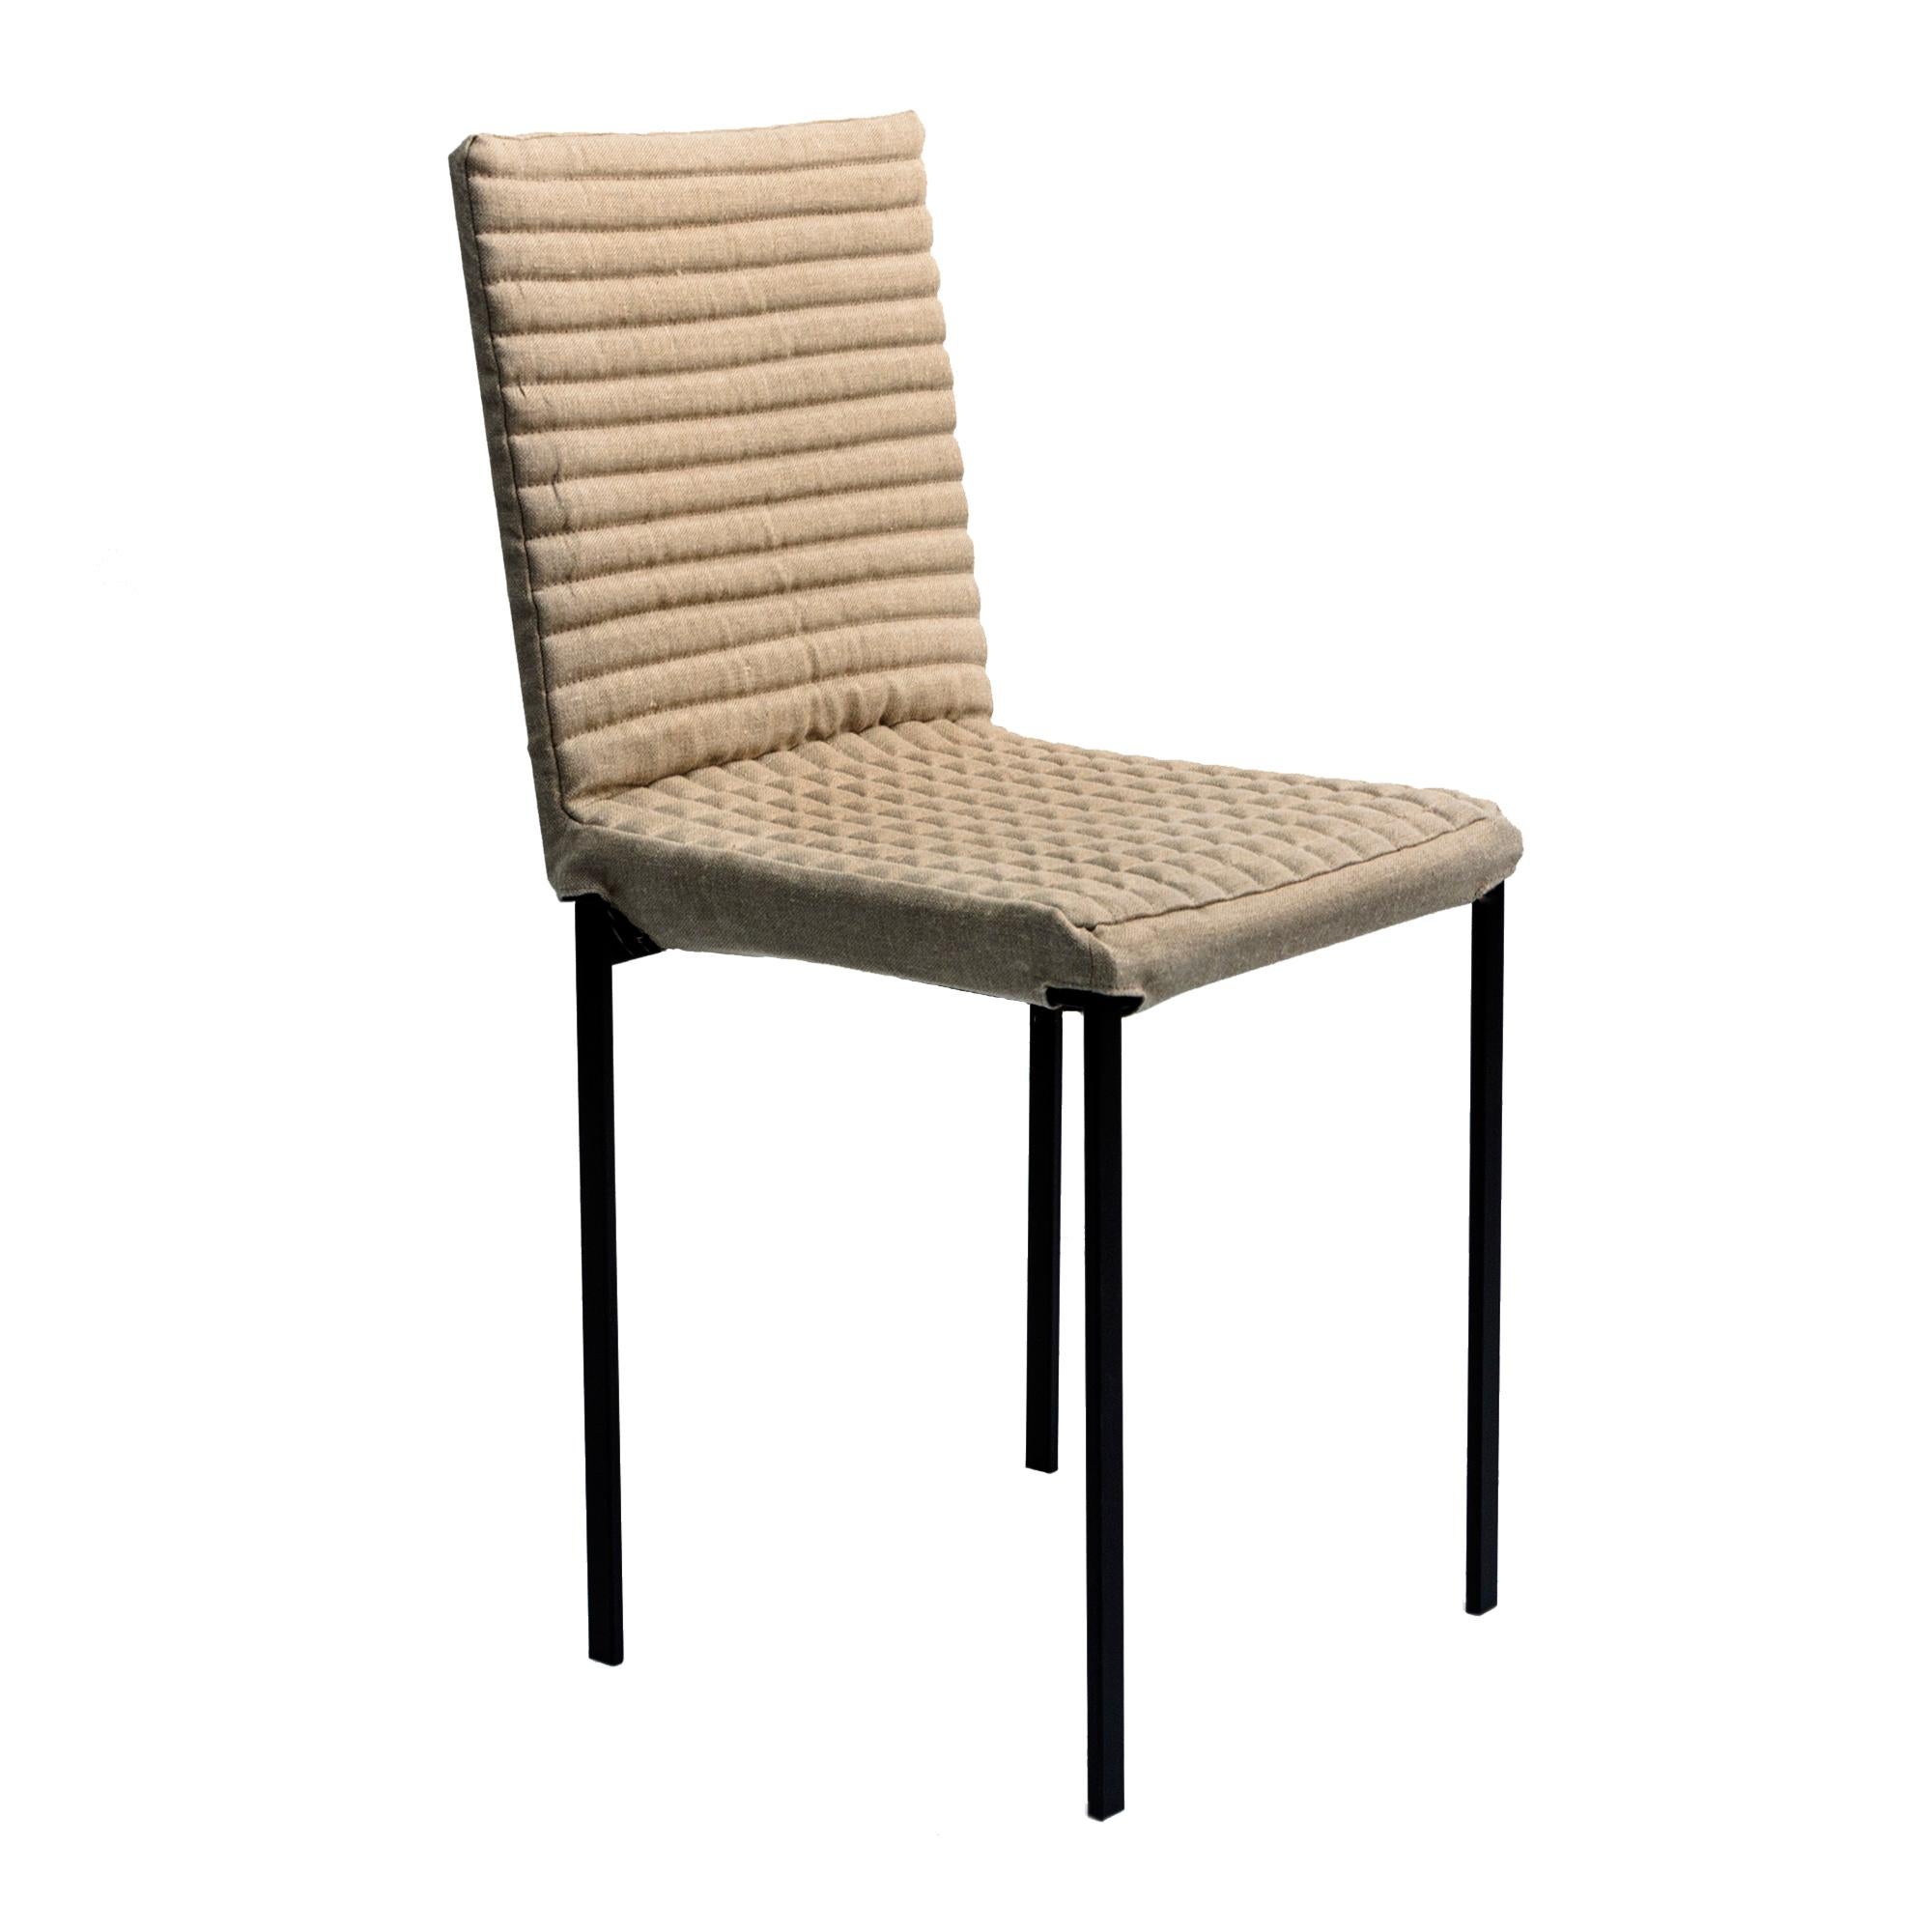 The ‘Tanit Soft’ chairs are available with an option that makes them unique objects in terms of richness and comfort: an upholstered and quilted cover of various colors that is put on the frame and fastened with a Velcro strap. 
The upholstered